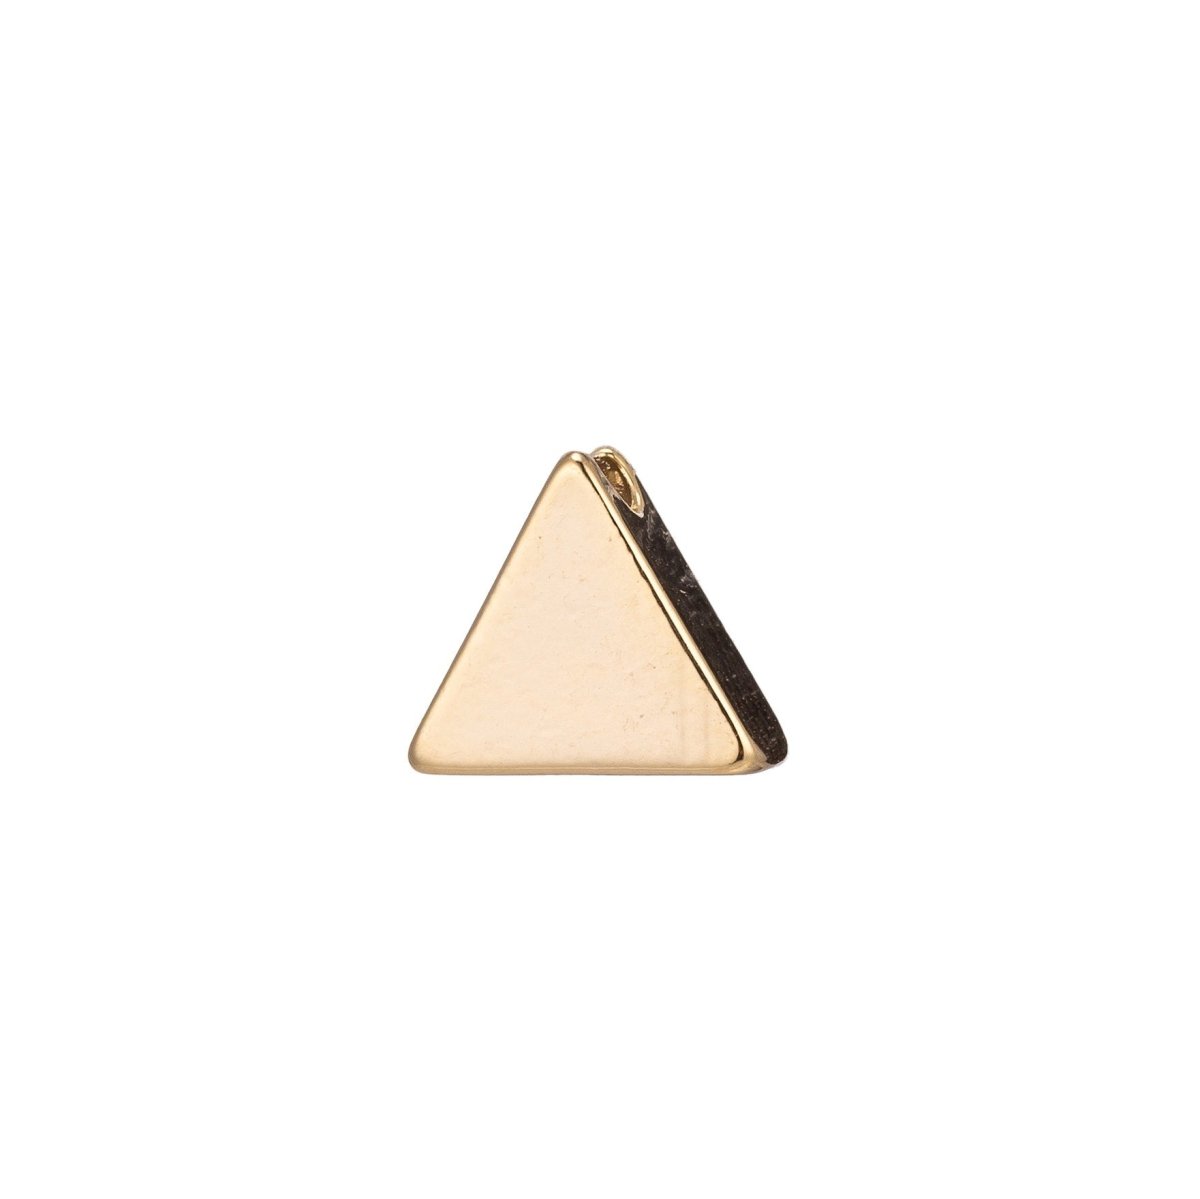 Gold Triangle Charm - 18k Gold Filled Over Brass - Gold Connector - 6mm / 7mm - Triangle Bead - Bracelet Necklace Connector link B-142 - DLUXCA